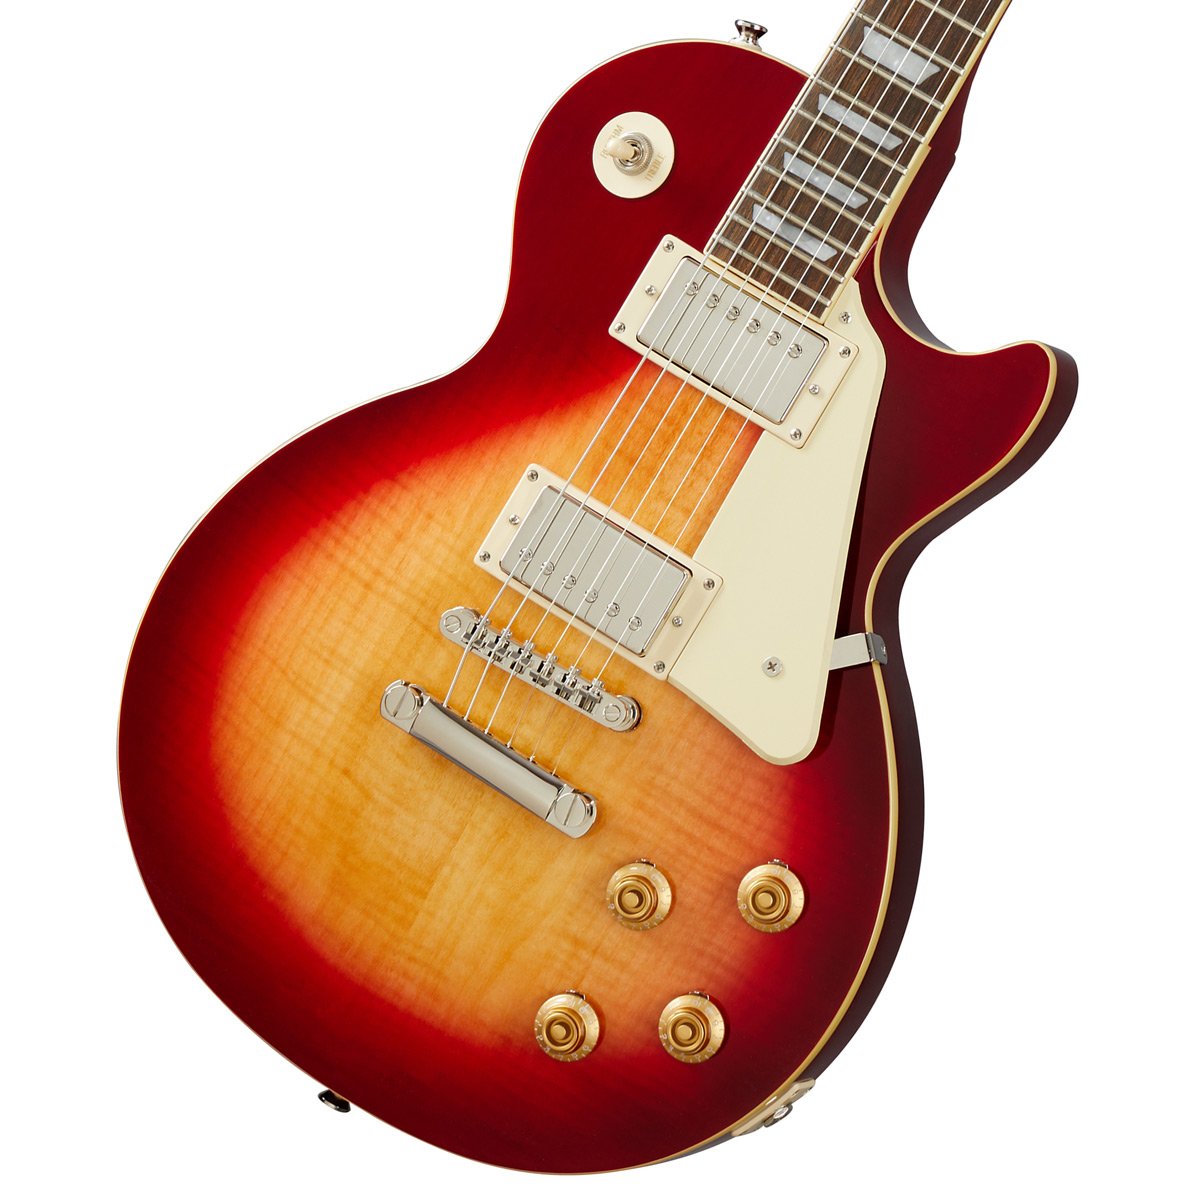 Epiphone / Inspired by Gibson Les Paul Standard 50s Heritage Cherry  Sunburst エレキギター レスポール スタンダード